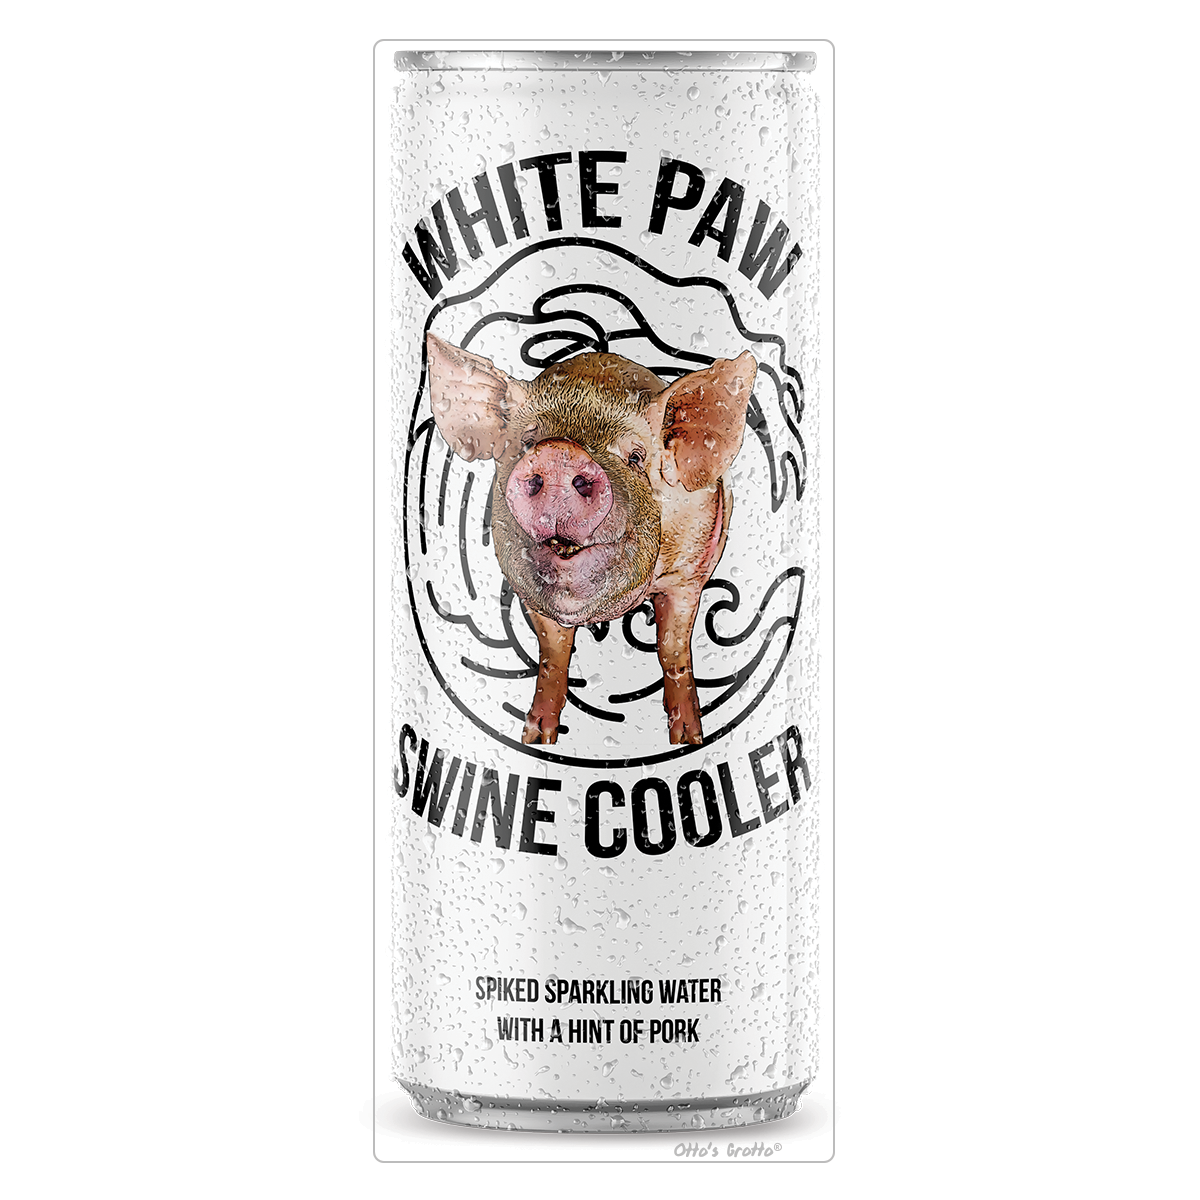 Funny Pig Sticker White Paw Swine Cooler - Funny Spoof Wine Cooler Sticker for Pig Farmers, Swine Lovers, Pork Fiends, Friends of Bacon